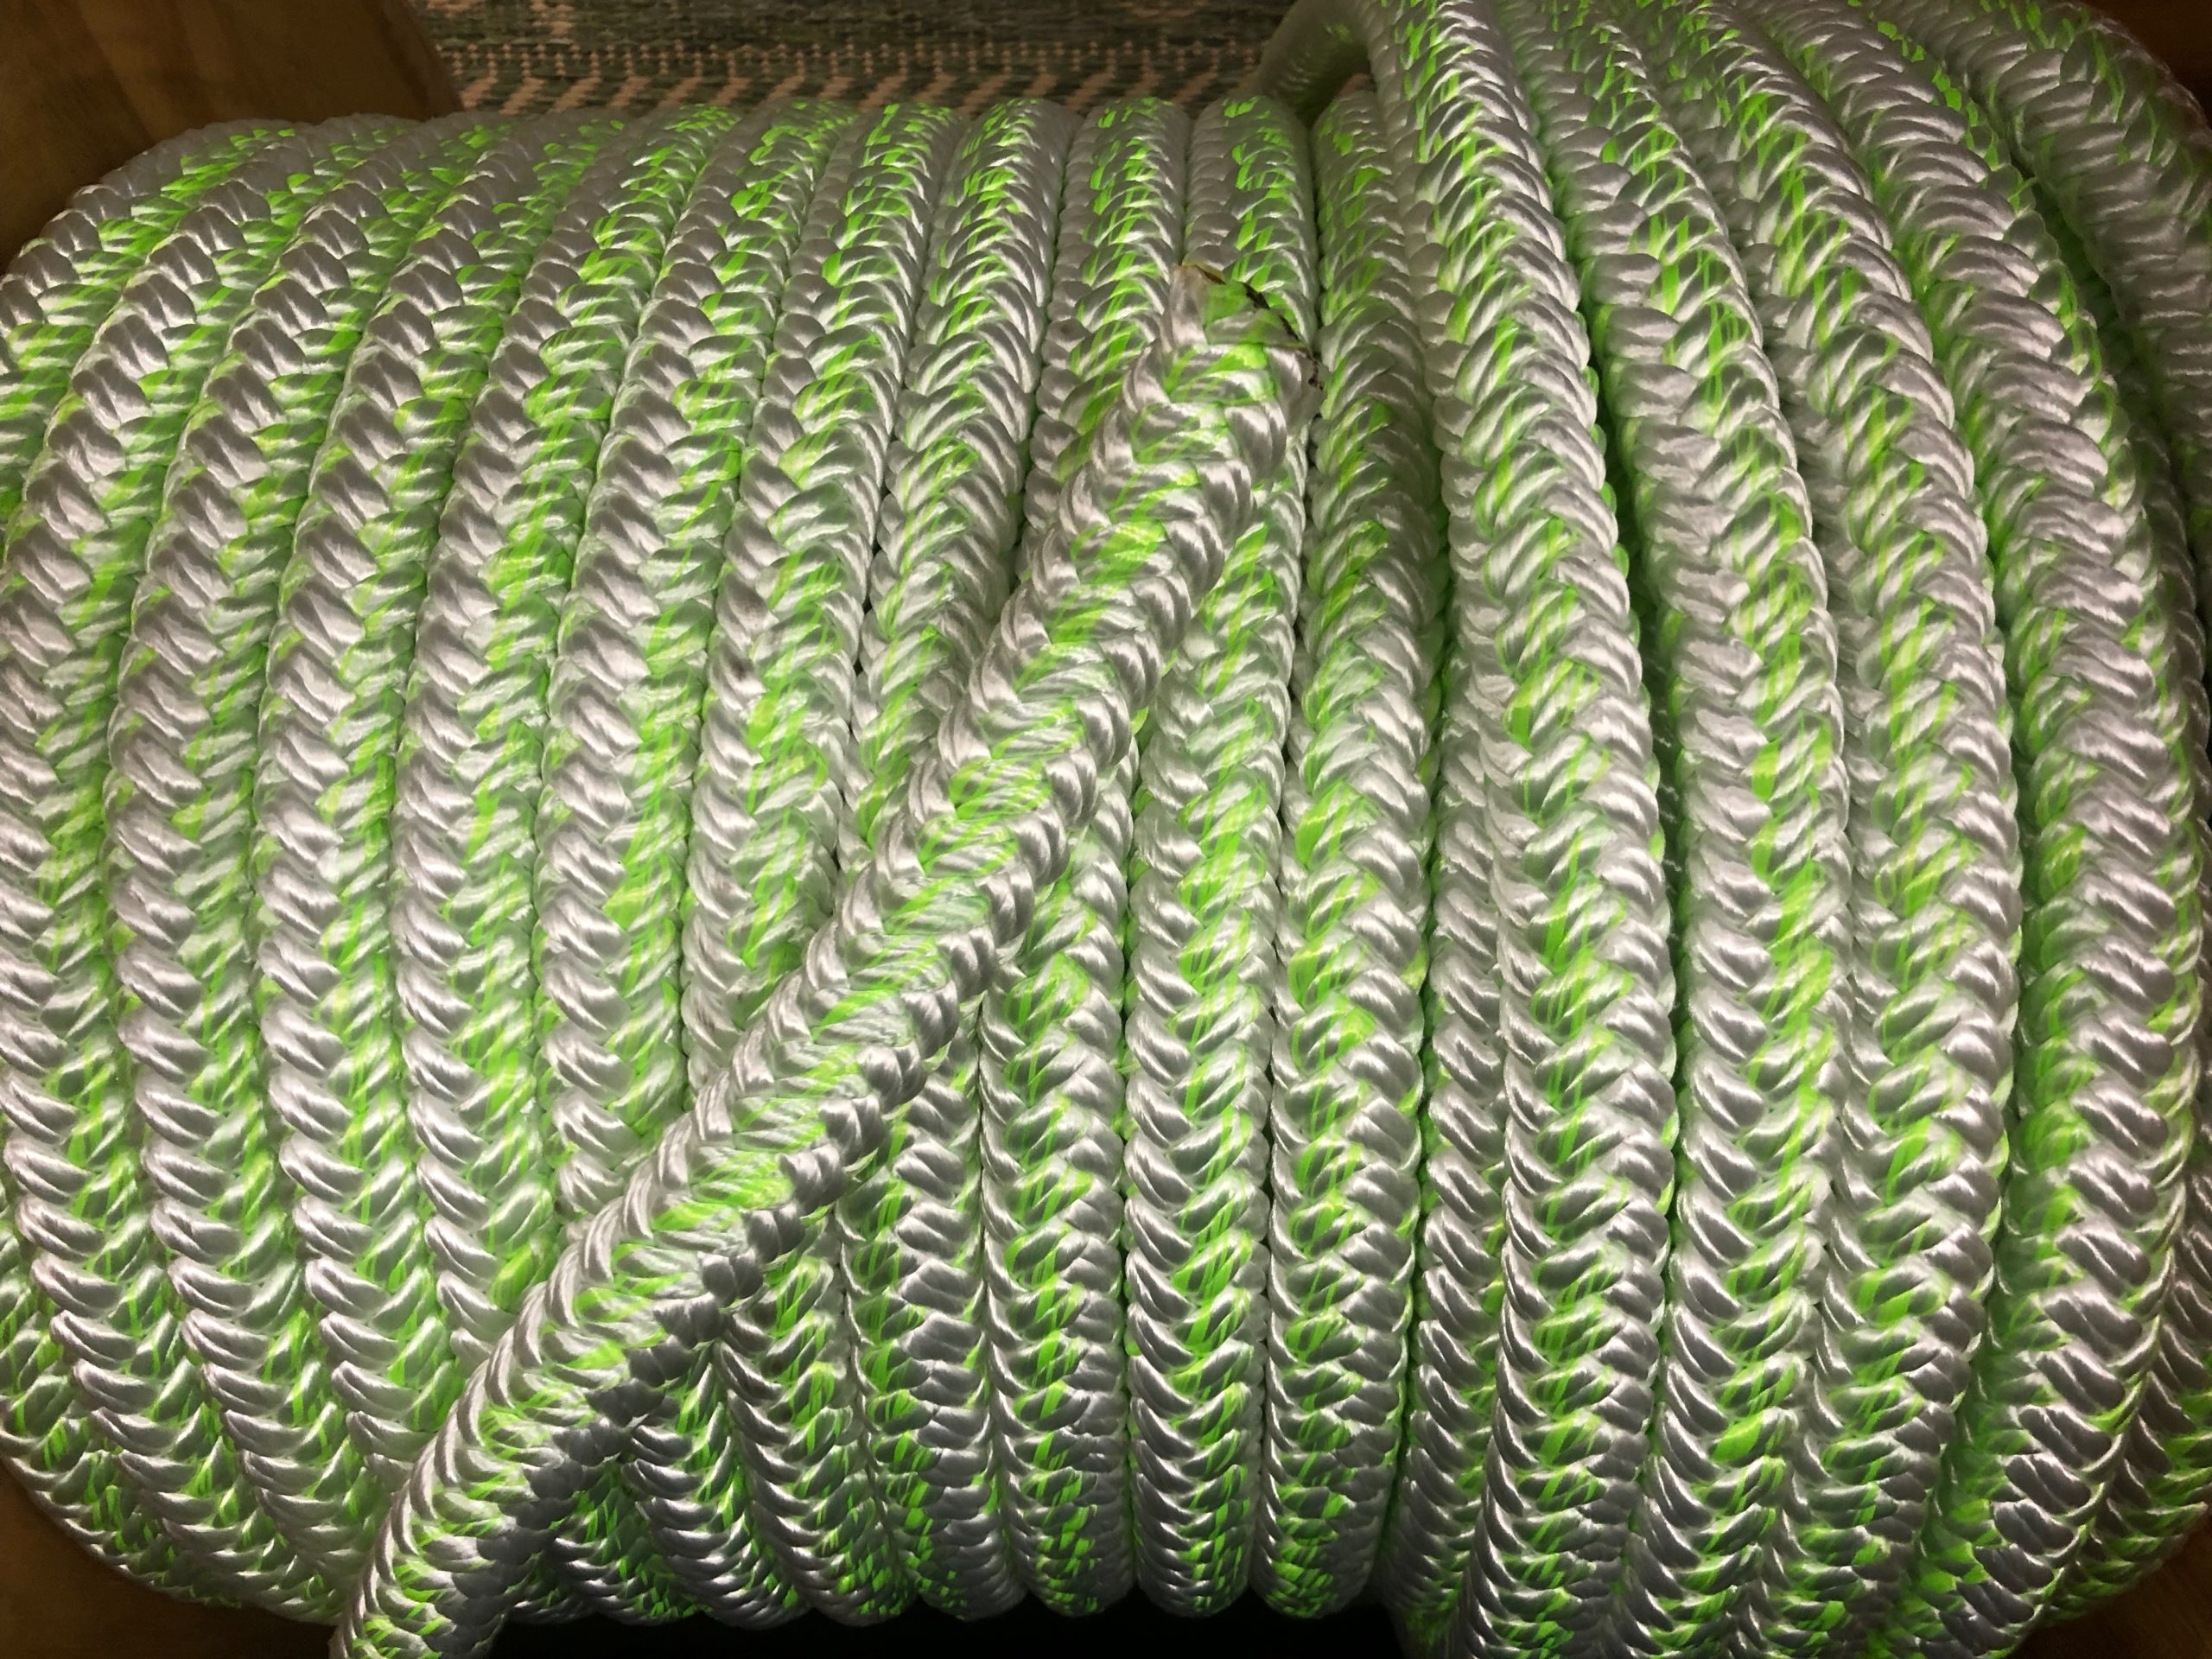 TINVHY 5/8Inch x 150FT Arborist Bull Rope, Double Braid Polyester Rope,  Tree Rigging Line Utility Rope for Halyard, Sailboat Weathered Line, Tree